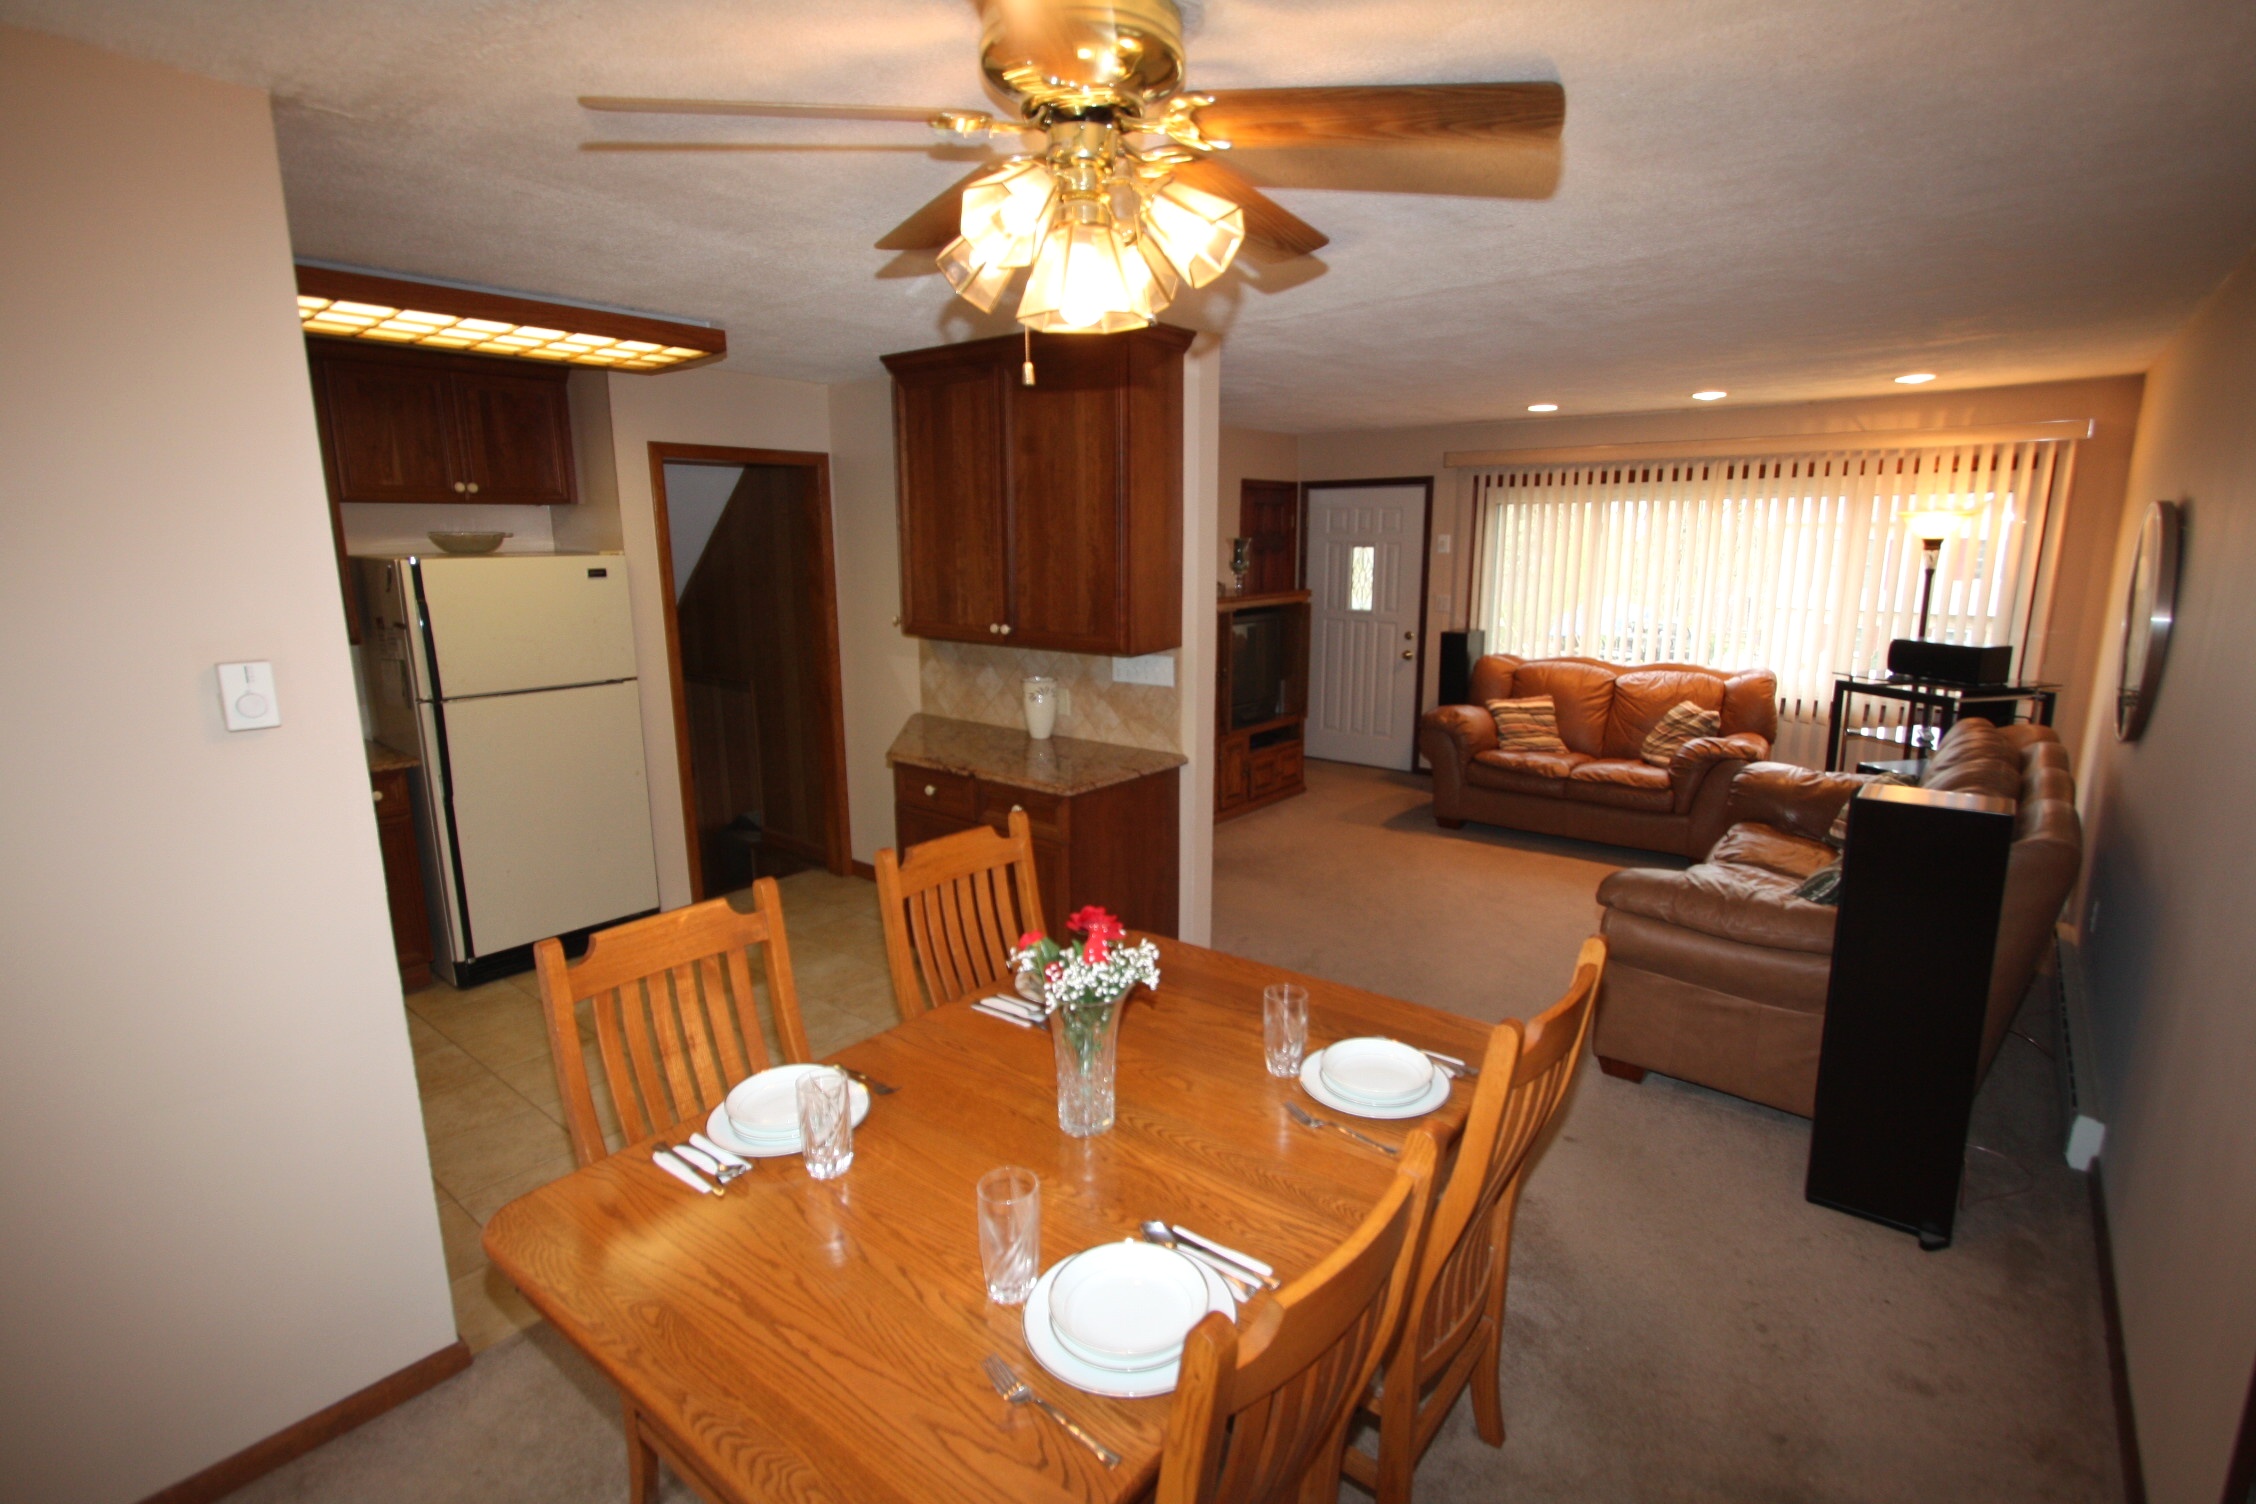 Ceiling Fans For A Dining Room